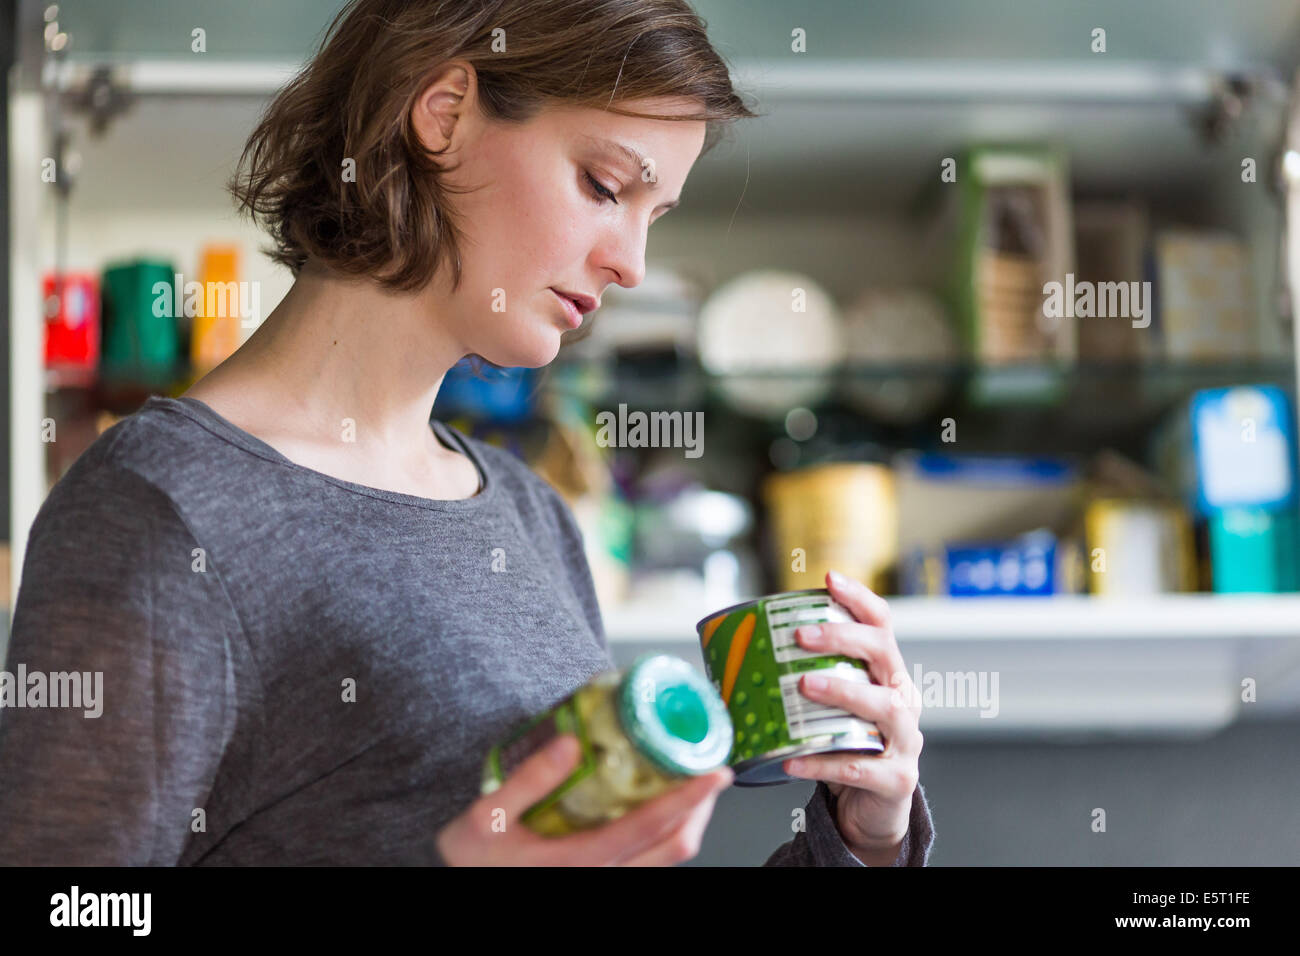 Woman checking the composition and nutrition facts. Stock Photo